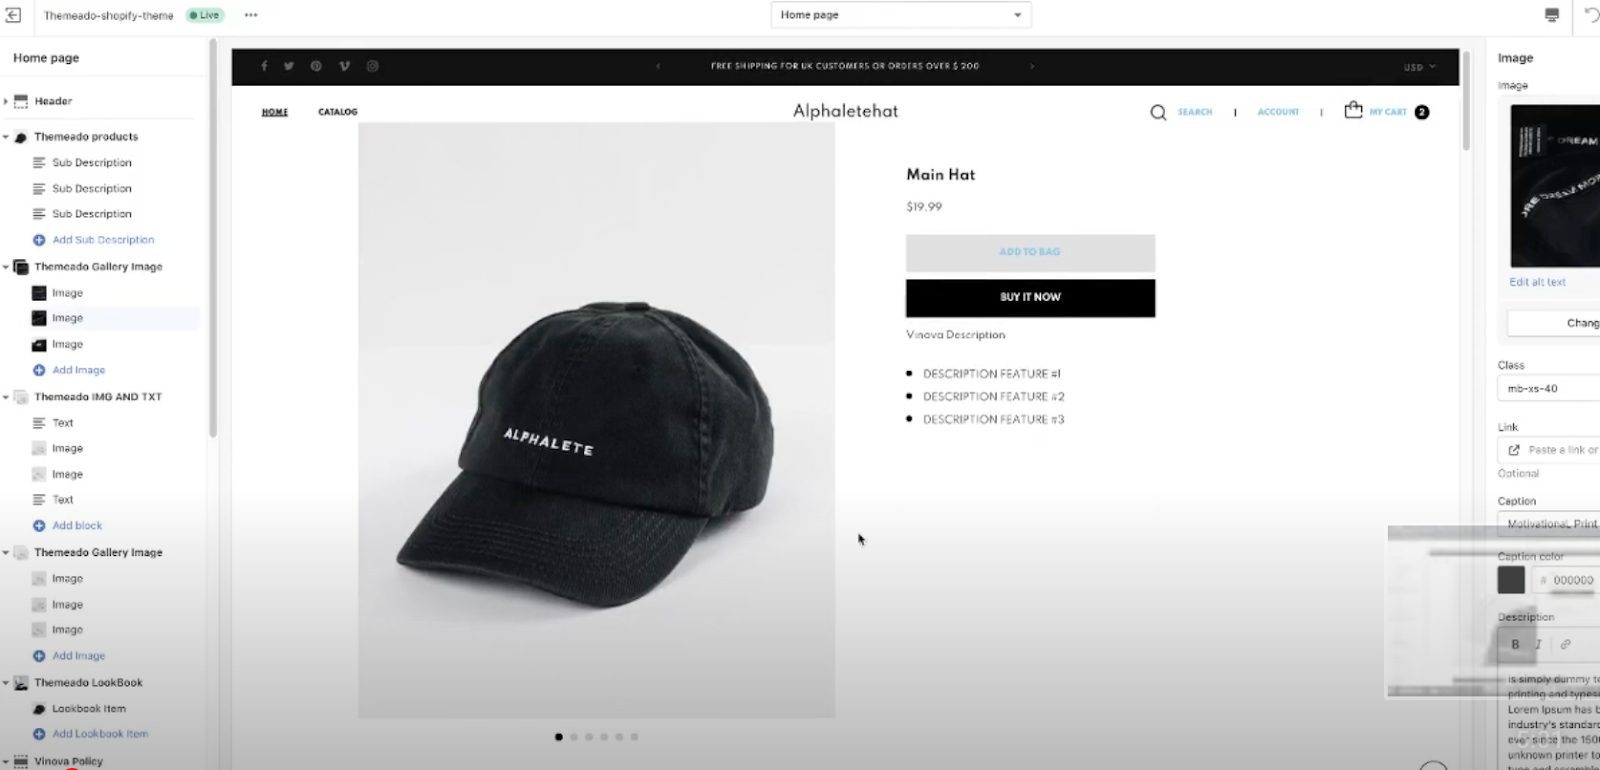 An image showing the shopify User Interface